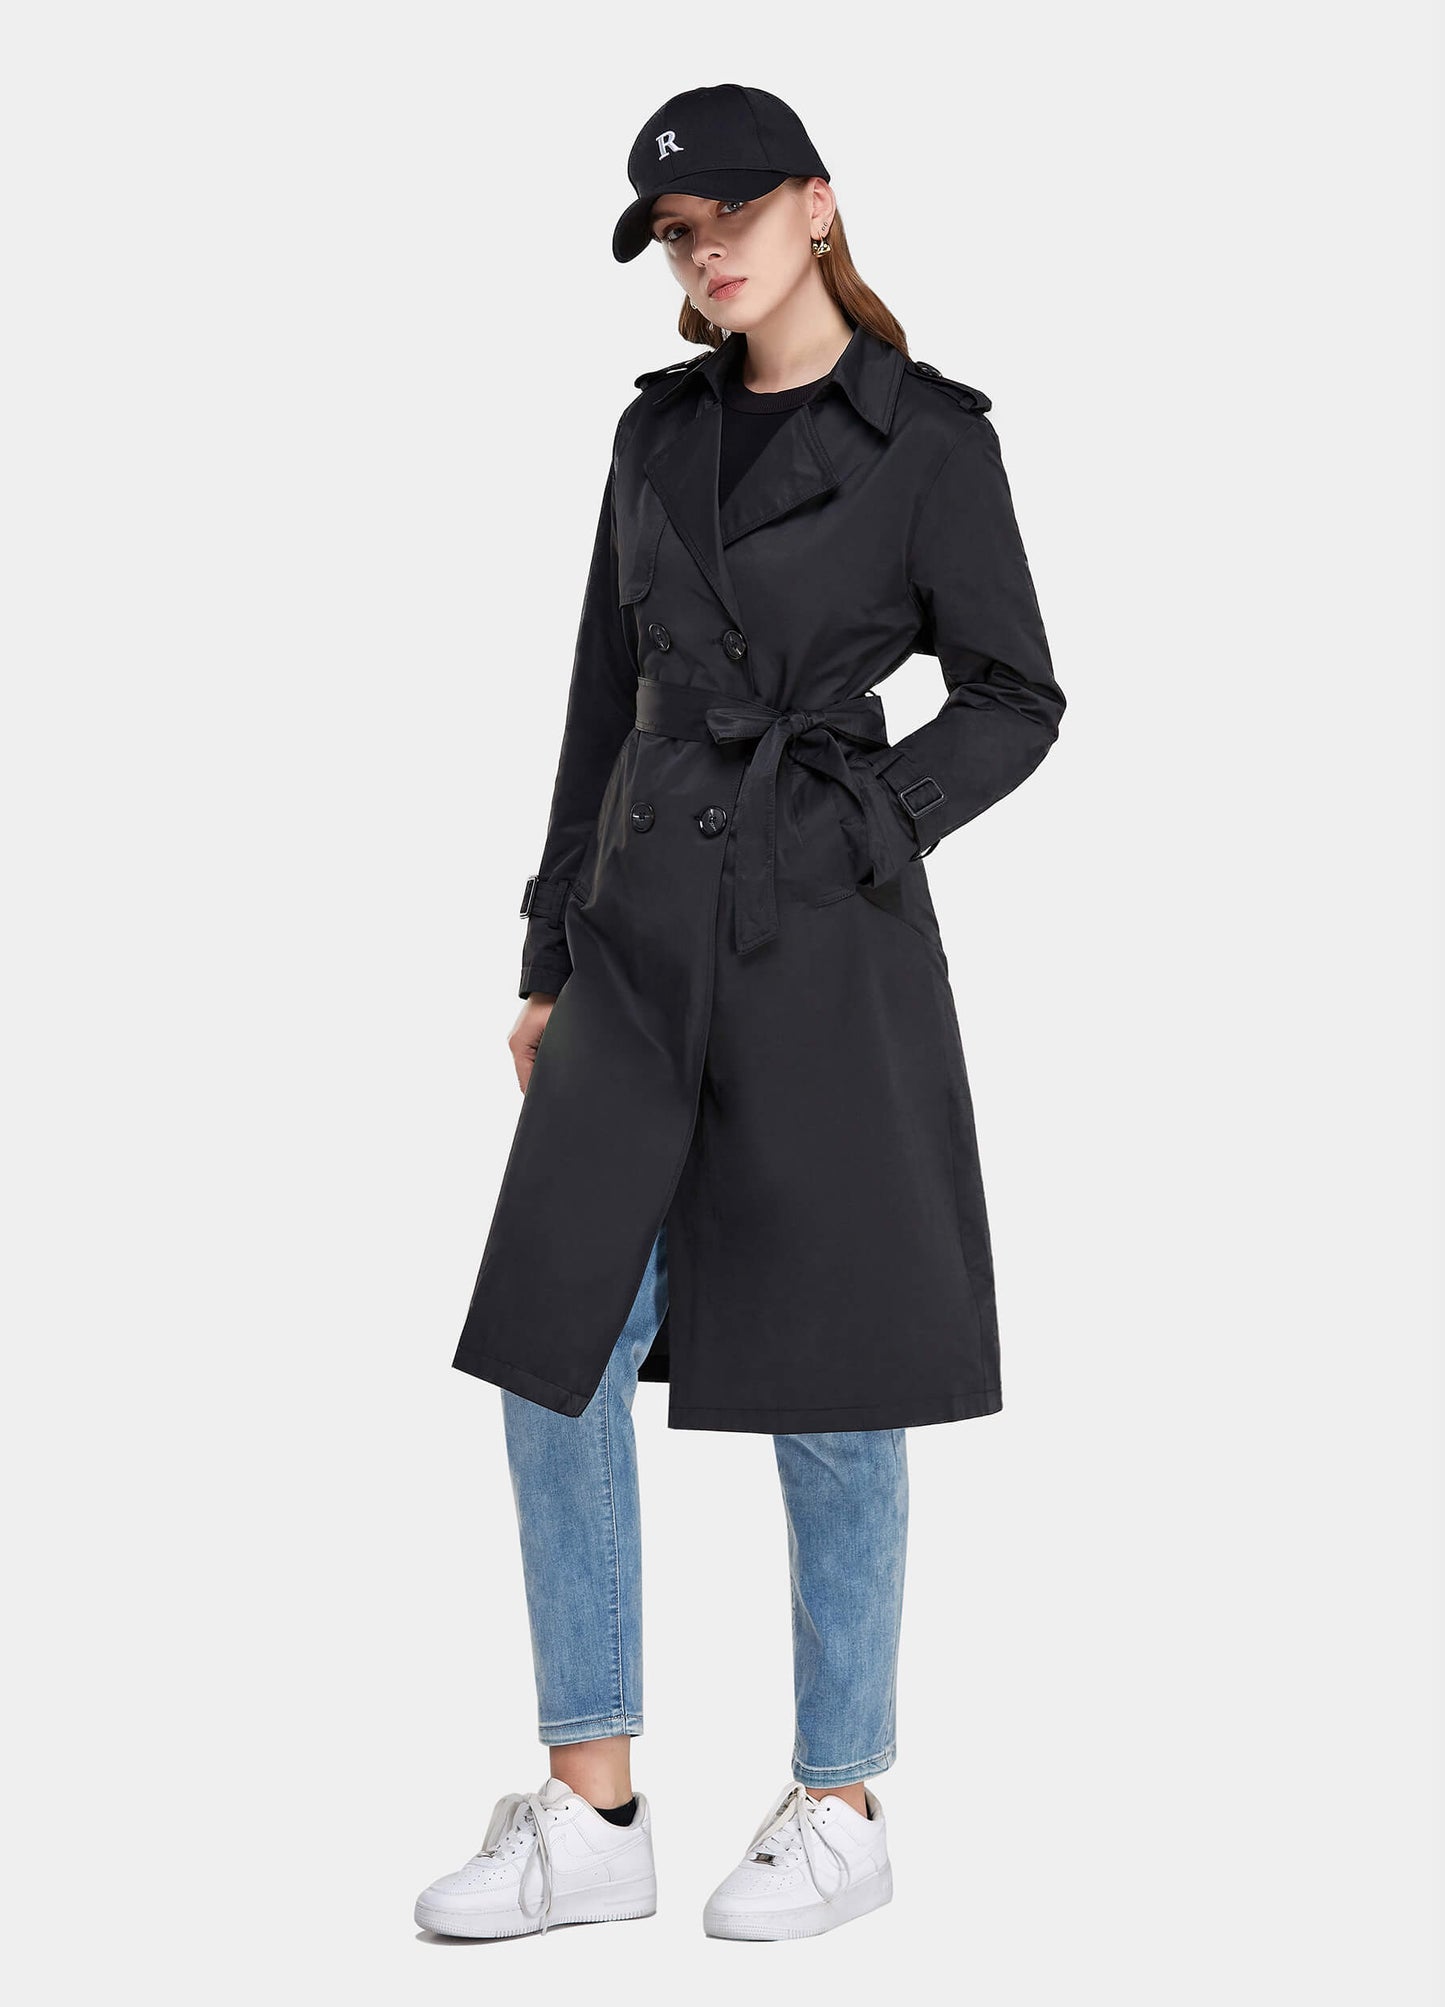 MECALA Women's Double Breasted Buckle Belted Black Trench Coat